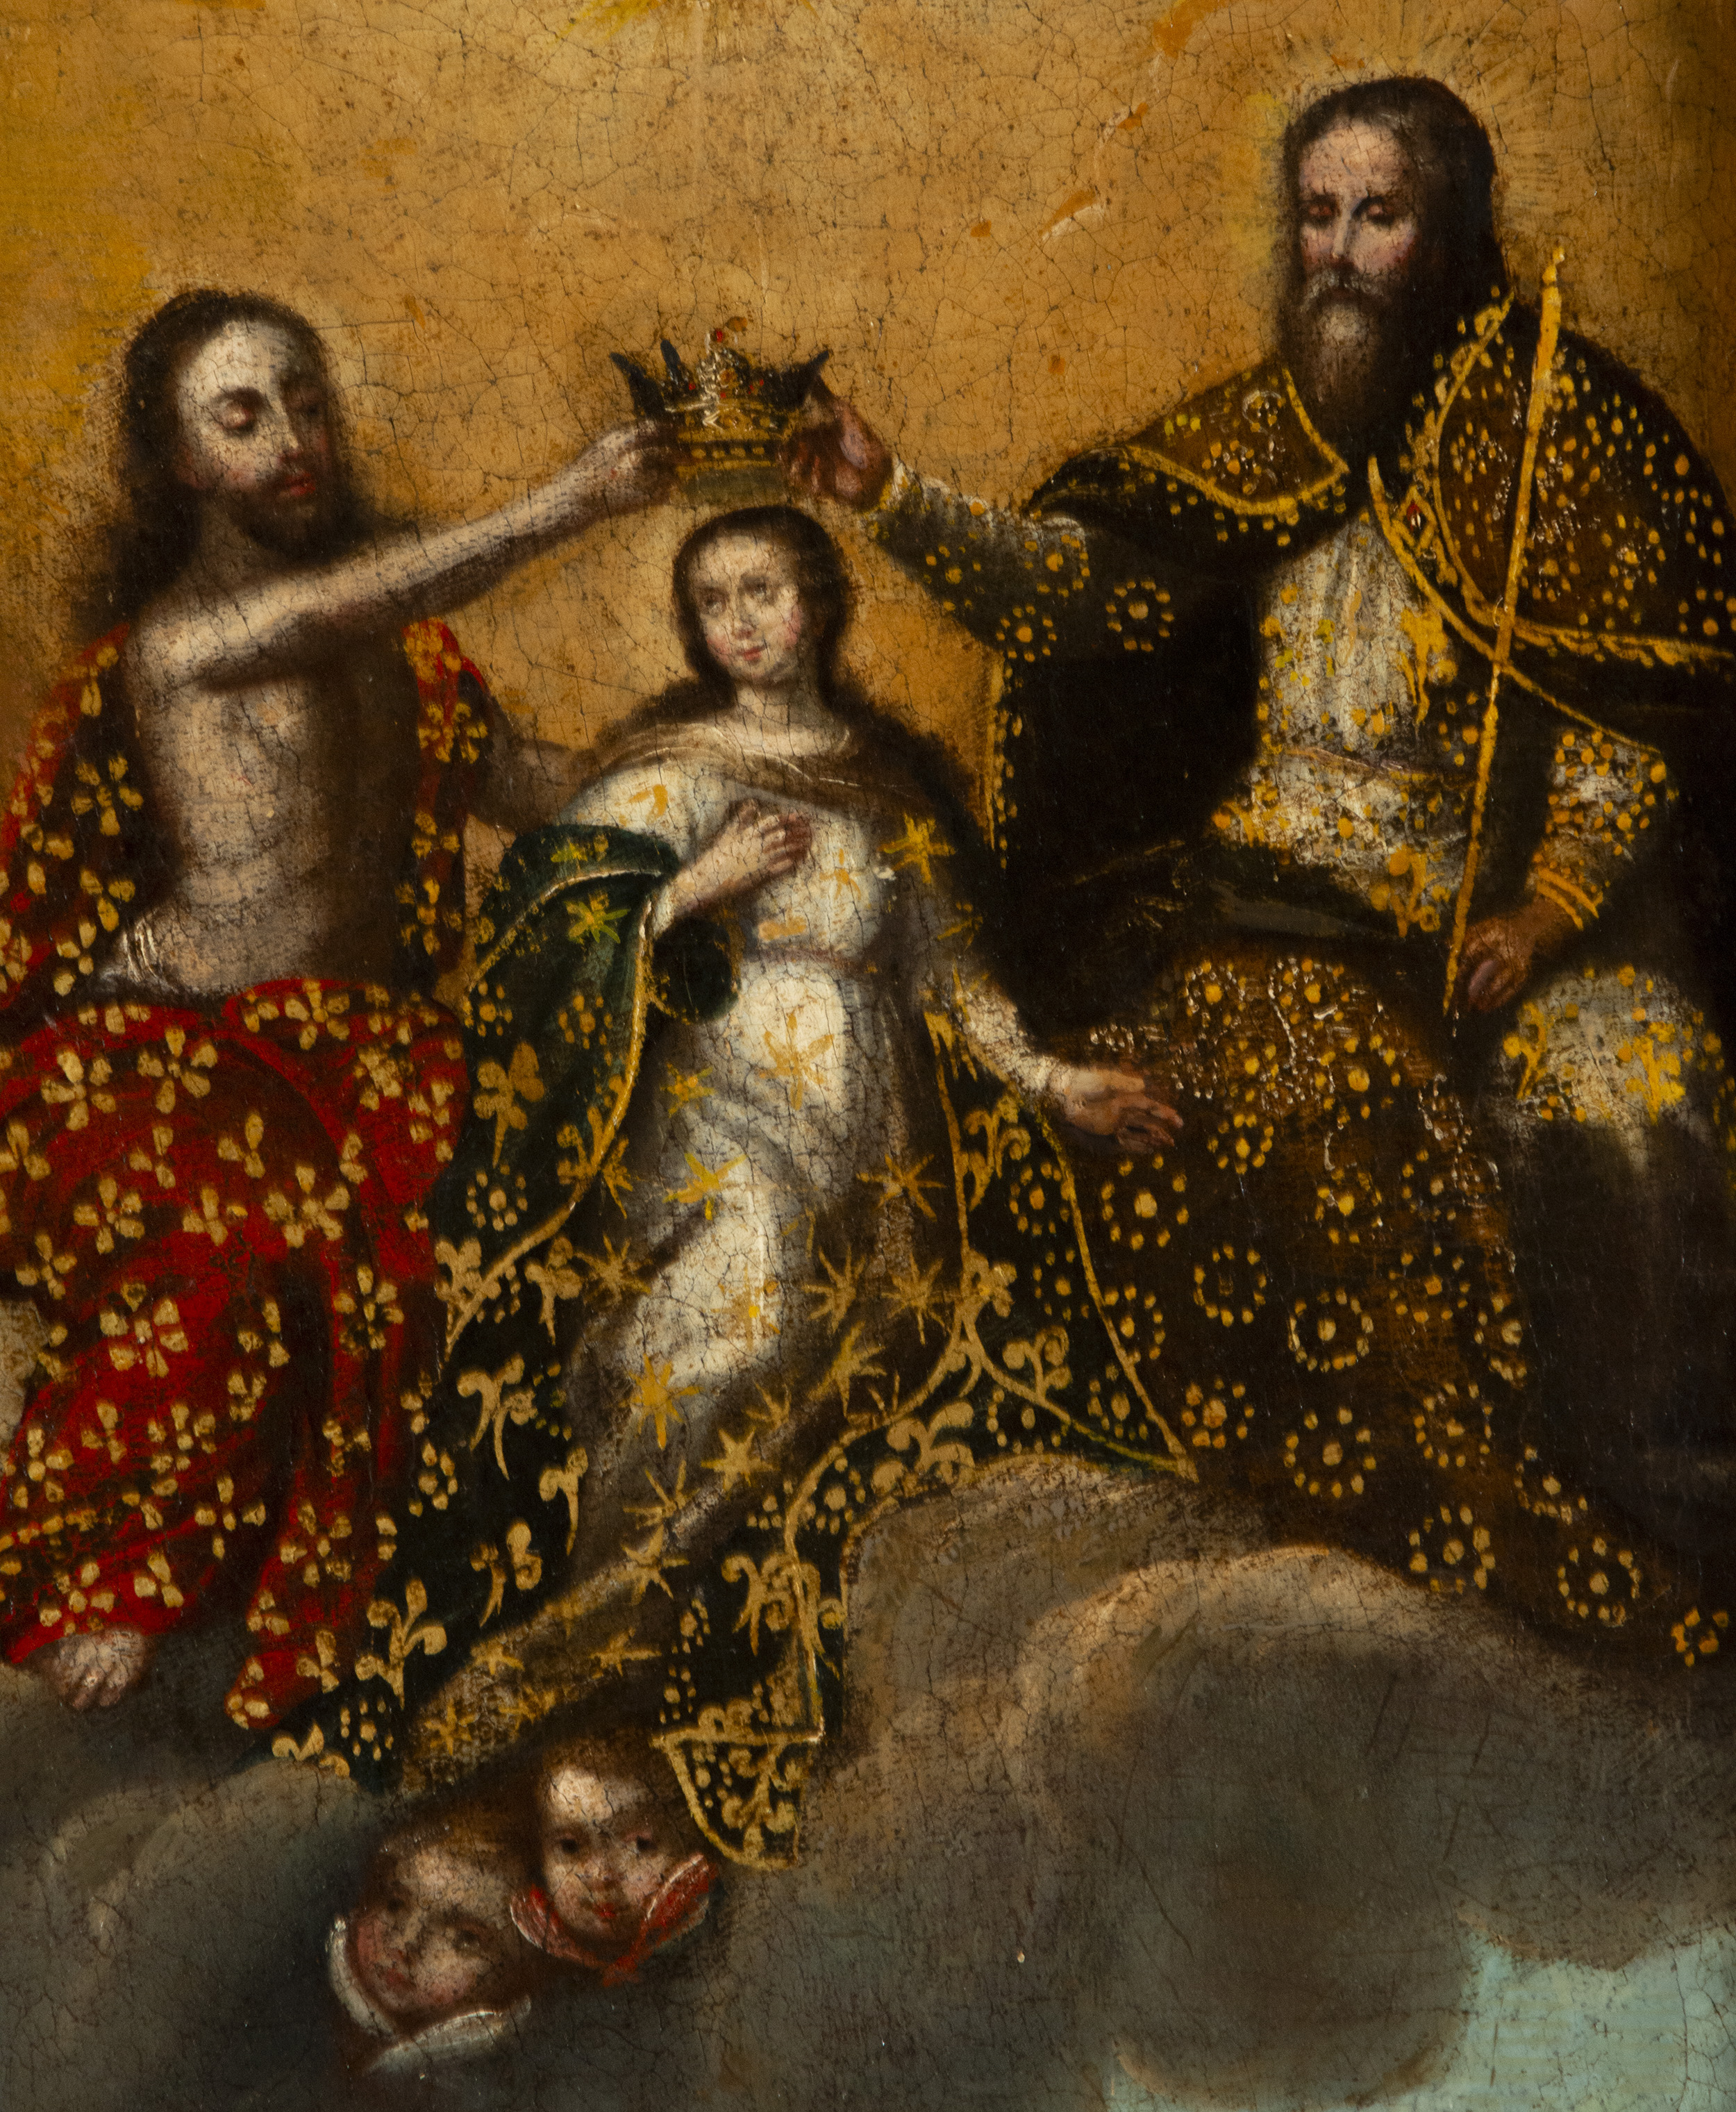 Exquisite Coronation of Mary, 18th century Spanish colonial school of Quito, present-day Ecuador - Image 2 of 12